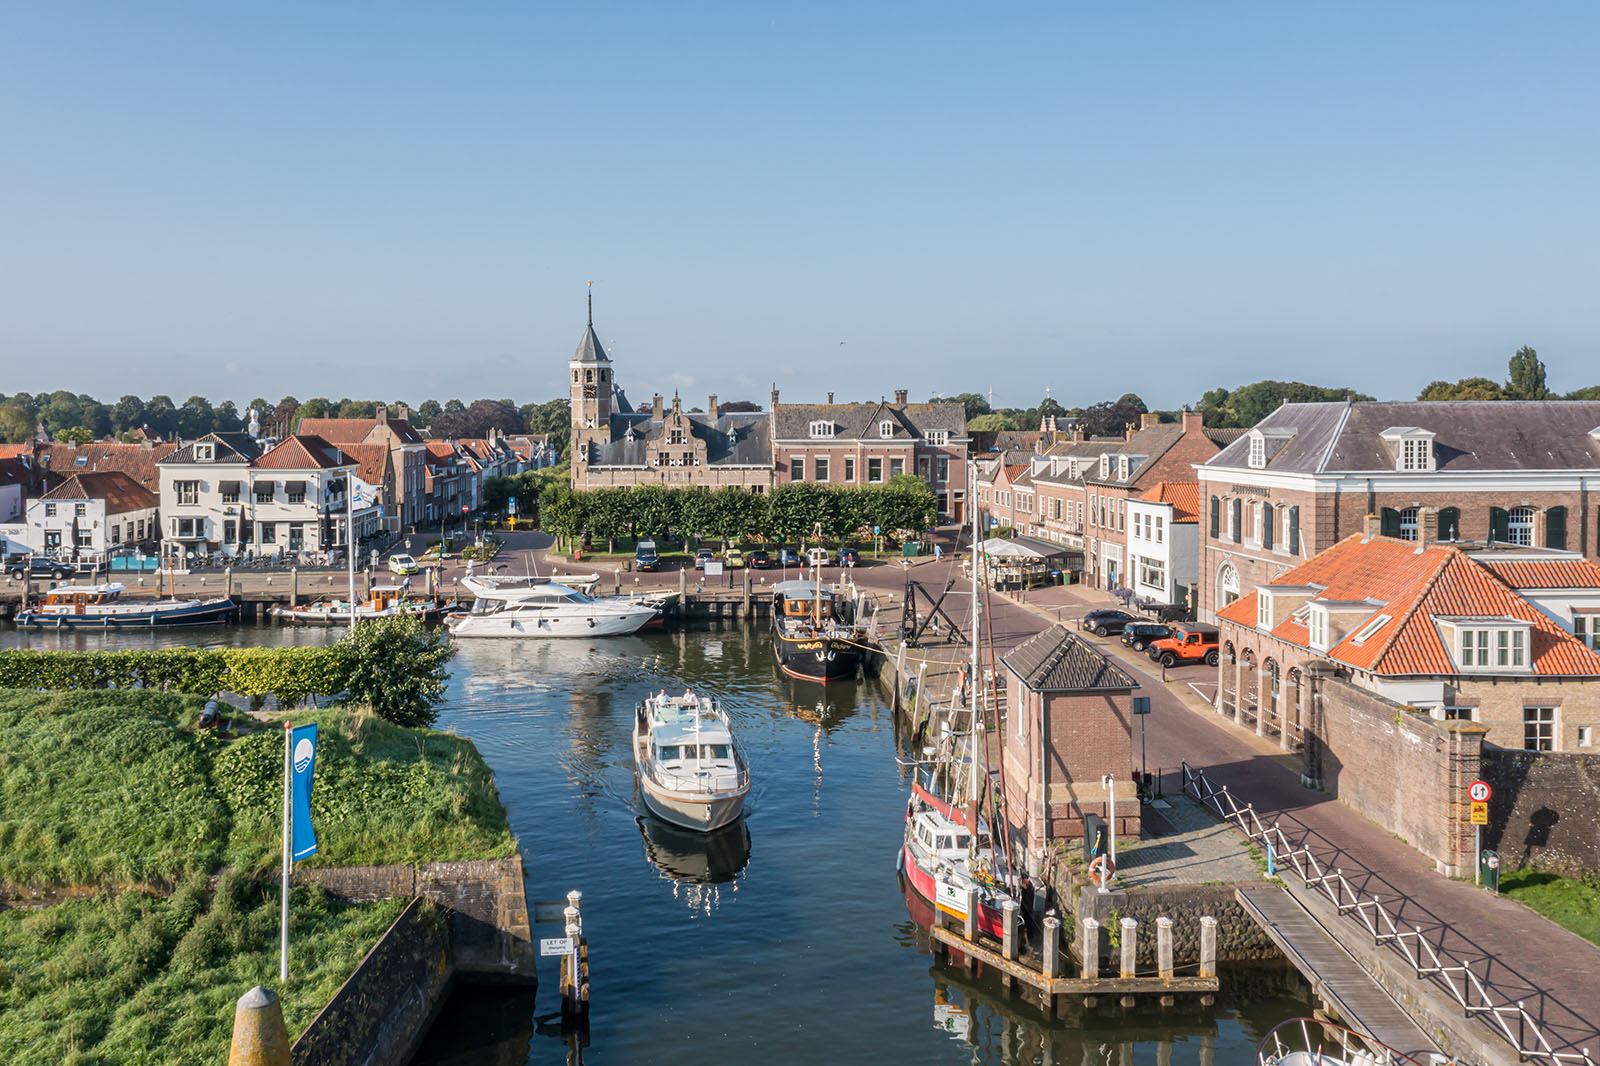 Rent a motor yacht in Zeeland without a licence